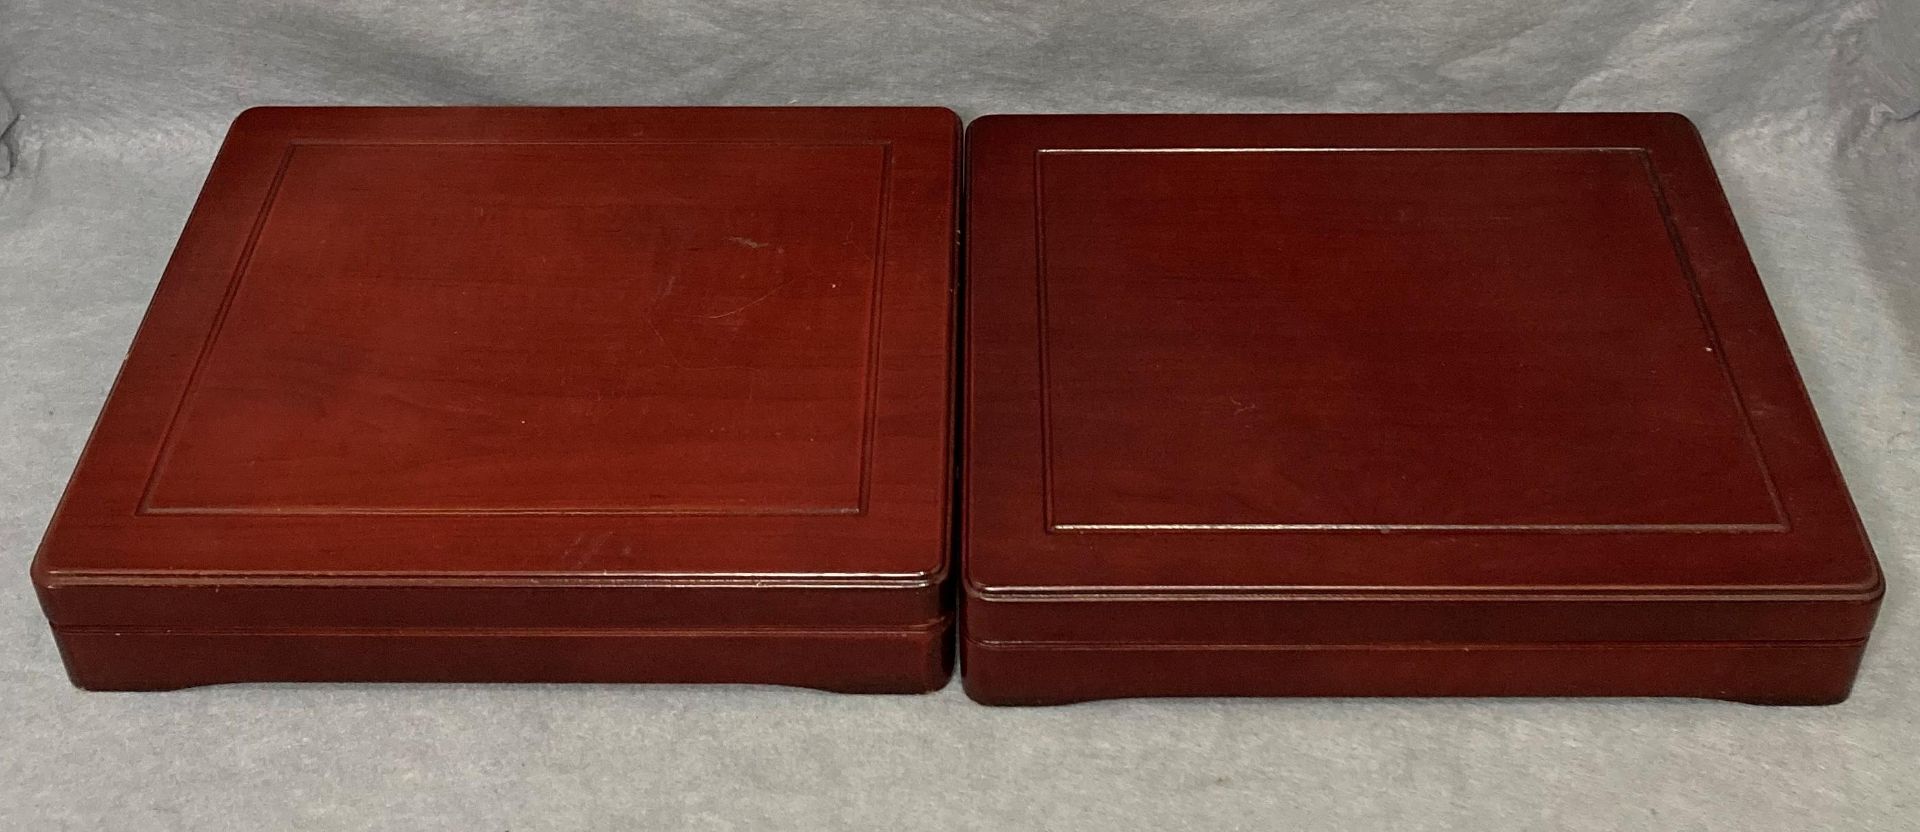 Contents to two fitted coin cases - twenty-six assorted commemorative coins some in silver and gold - Image 4 of 4